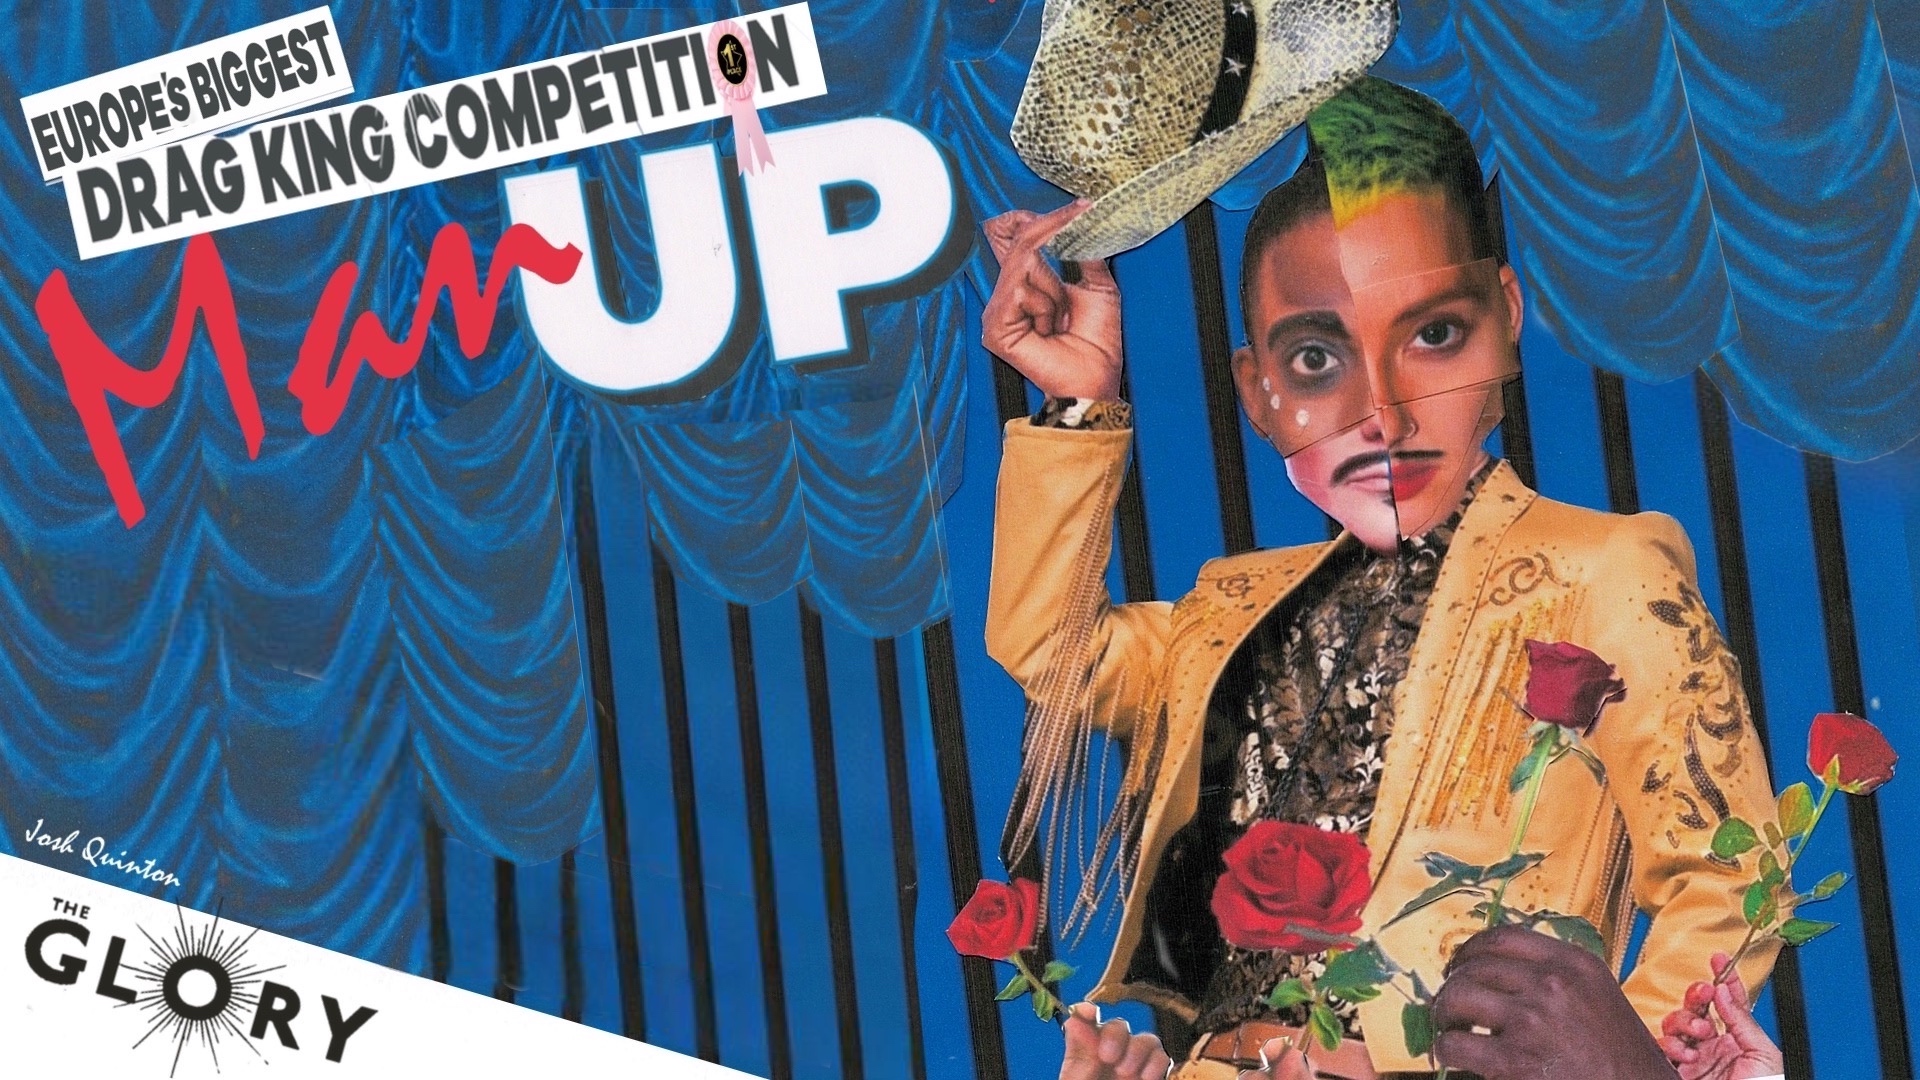 Man Up! Drag King Competition – HEAT 5